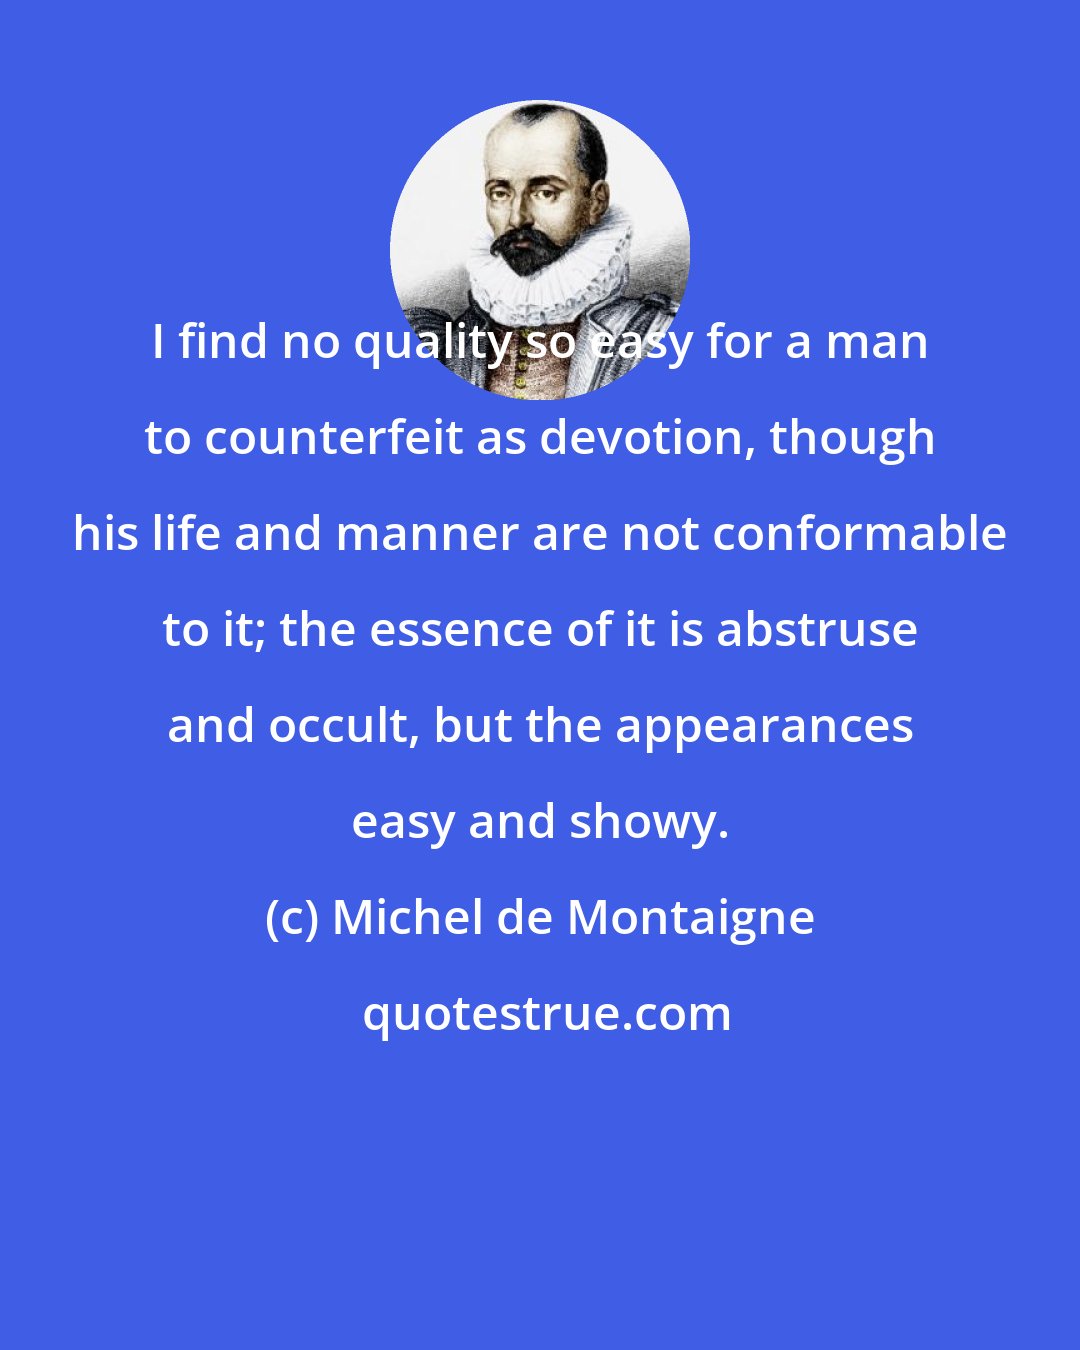 Michel de Montaigne: I find no quality so easy for a man to counterfeit as devotion, though his life and manner are not conformable to it; the essence of it is abstruse and occult, but the appearances easy and showy.